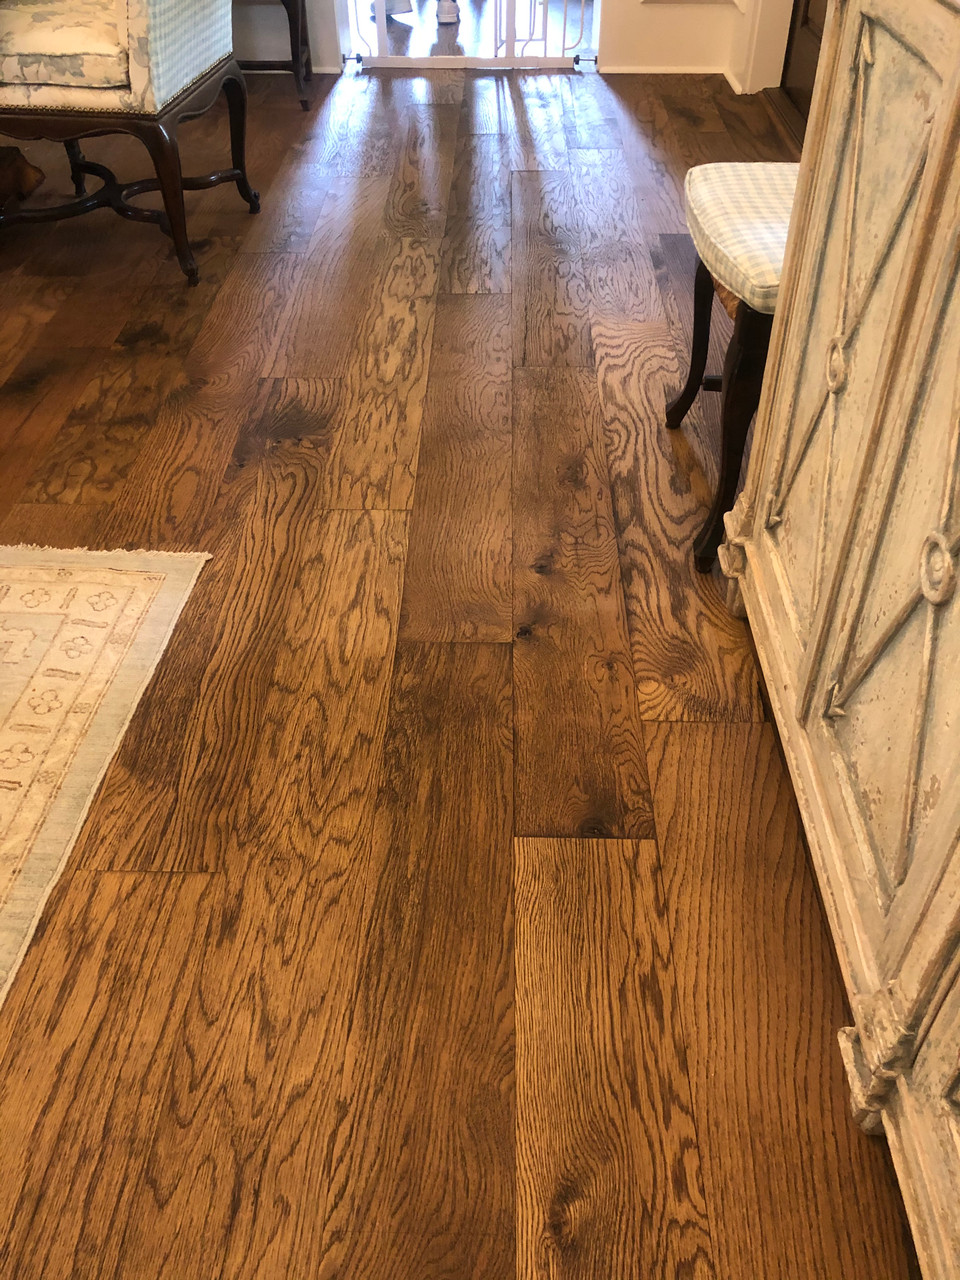 Hapwood White Oak 1/2" 5-ply Northern Mill Crafted Hardwood Flooring (Not Eligible For Free Shipping)